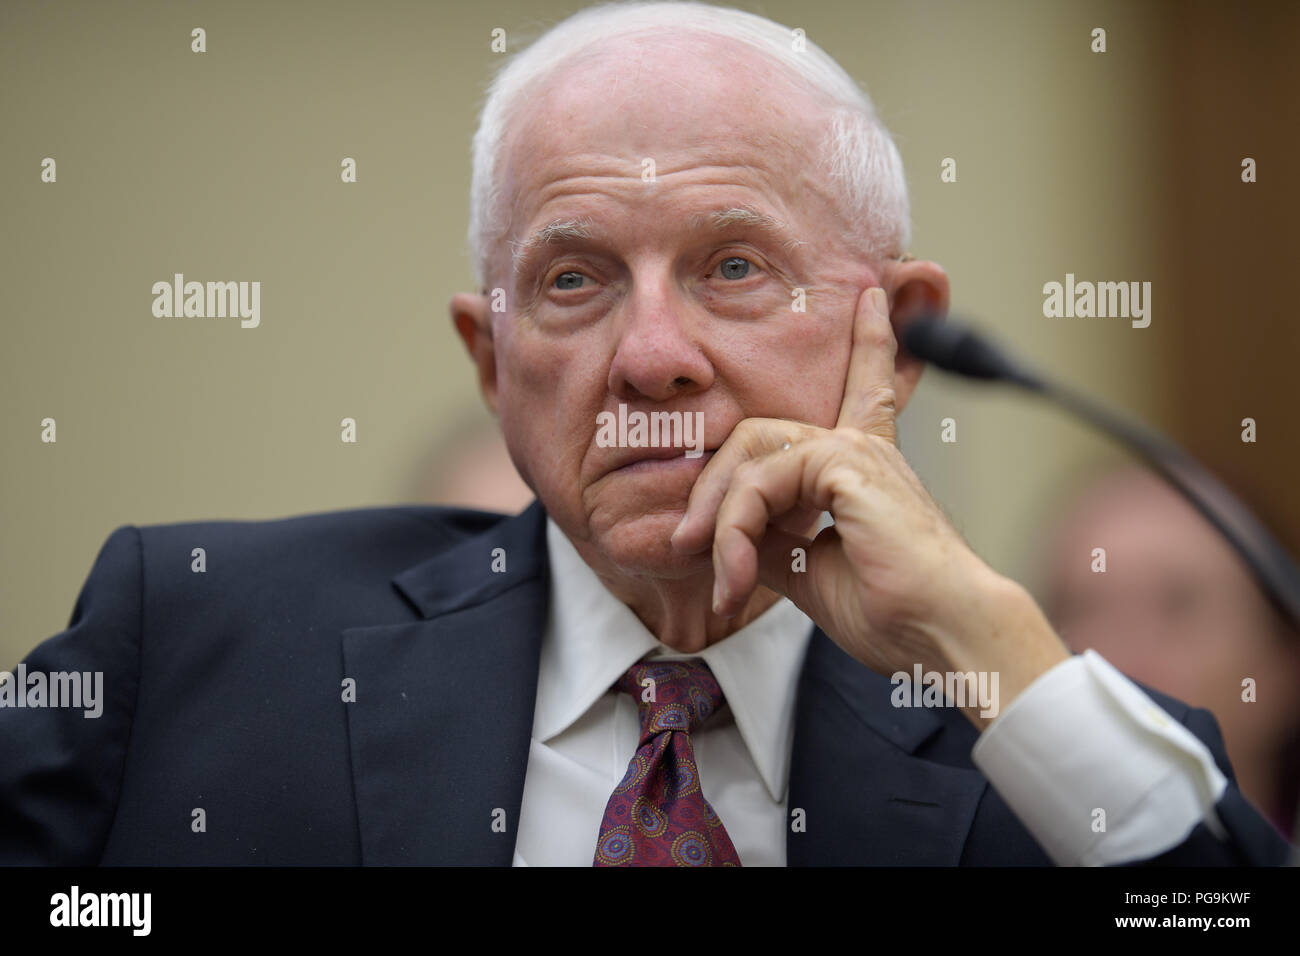 Tom Young, chairman, JWST Independent Review Board, testifies before the House Committee on Science, Space, and Technology during a hearing on the James Webb Space Telescope, Wednesday, July 25, 2018 at the Rayburn House Office Building in Washington. Stock Photo